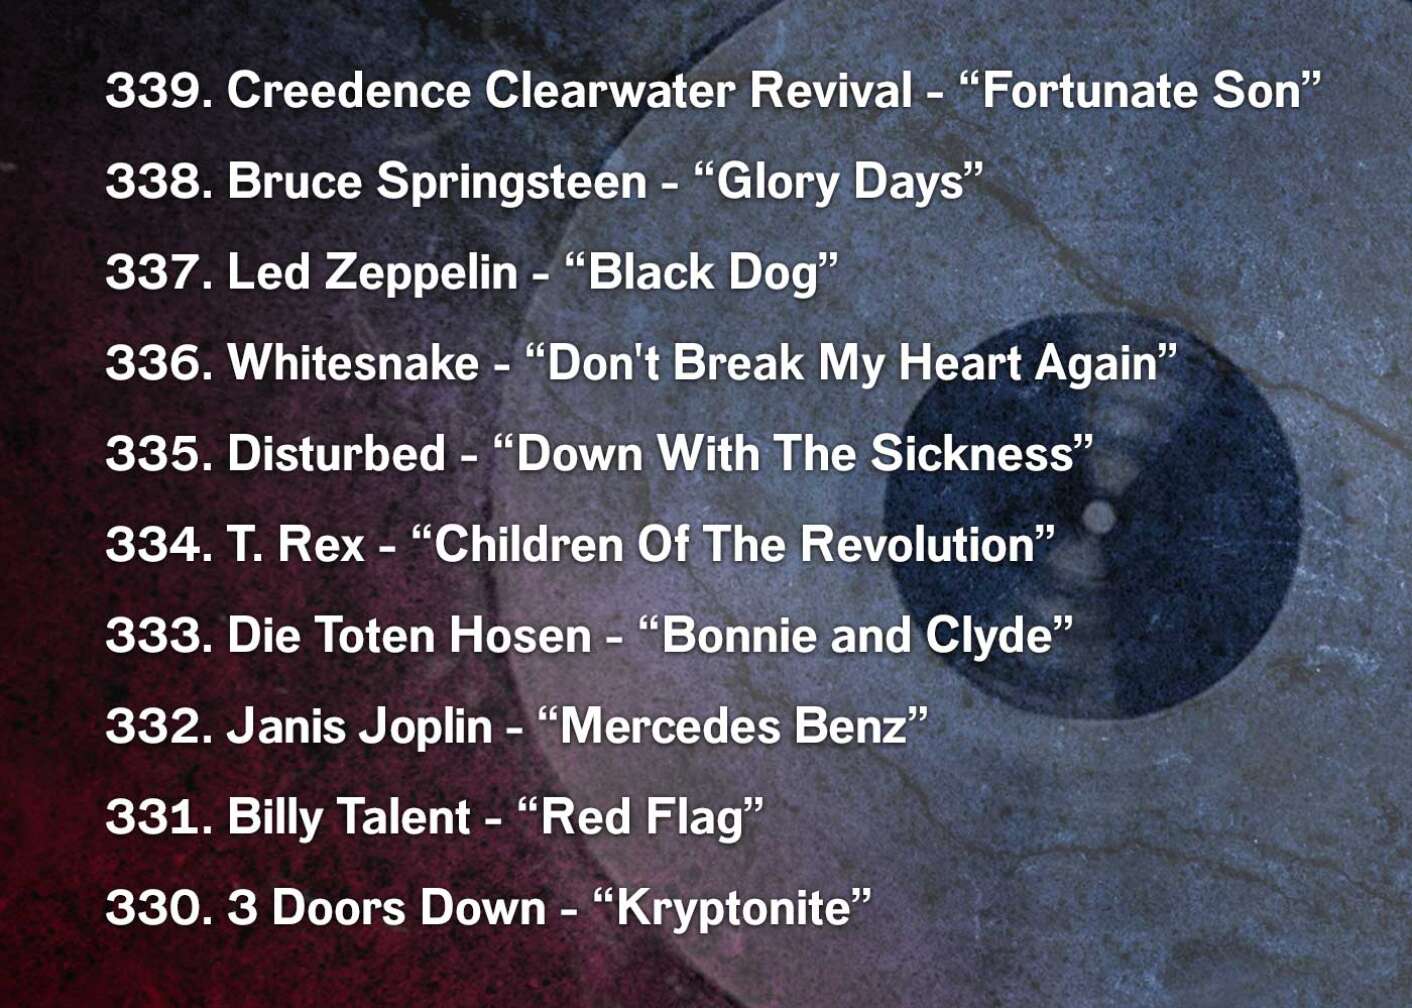 339. Creedence Clearwater Revival - “Fortunate Son” 338. Bruce Springsteen - “Glory Days” 337. Led Zeppelin - “Black Dog” 336. Whitesnake - “Don't Break My Heart Again” 335. Disturbed - “Down With The Sickness” 334. T. Rex - “Children Of The Revolution” 333. Die Toten Hosen - “Bonnie and Clyde” 332. Janis Joplin - “Mercedes Benz” 331. Billy Talent - “Red Flag” 330. 3 Doors Down - “Kryptonite”